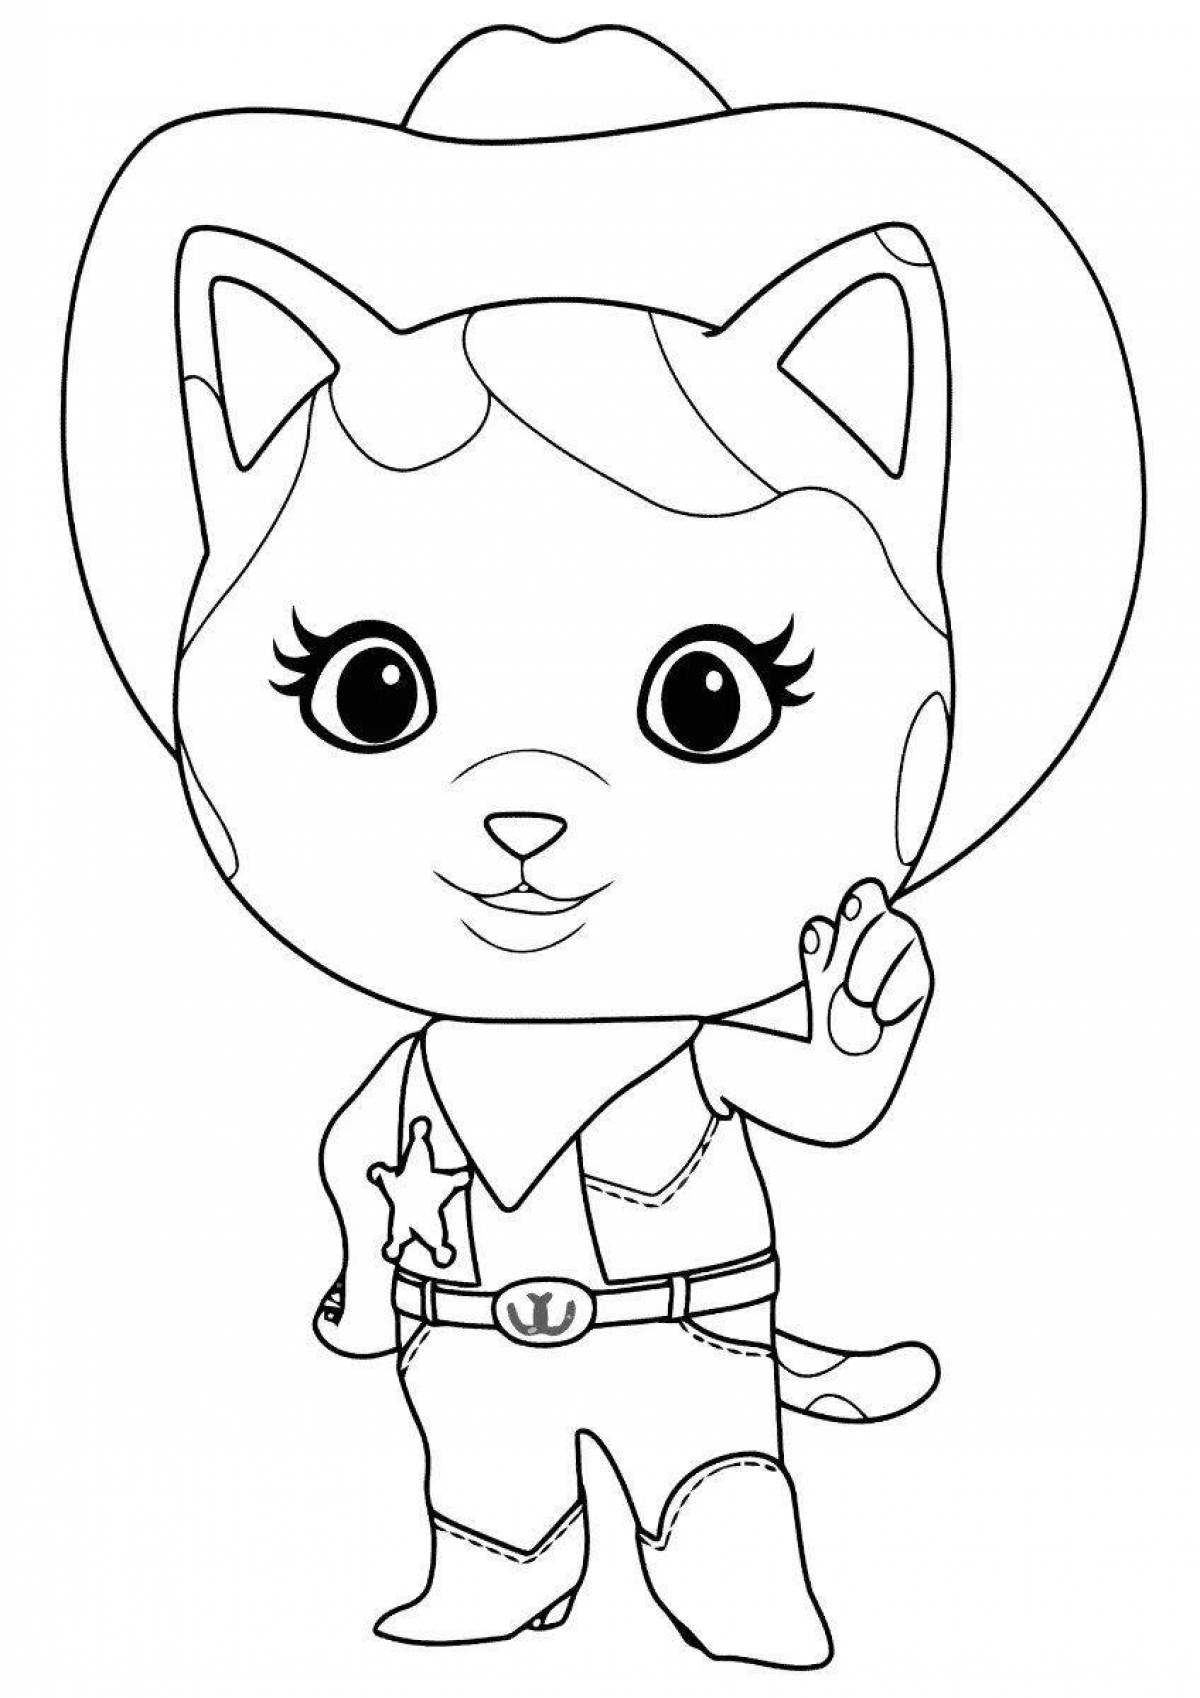 Funny angela cat coloring book